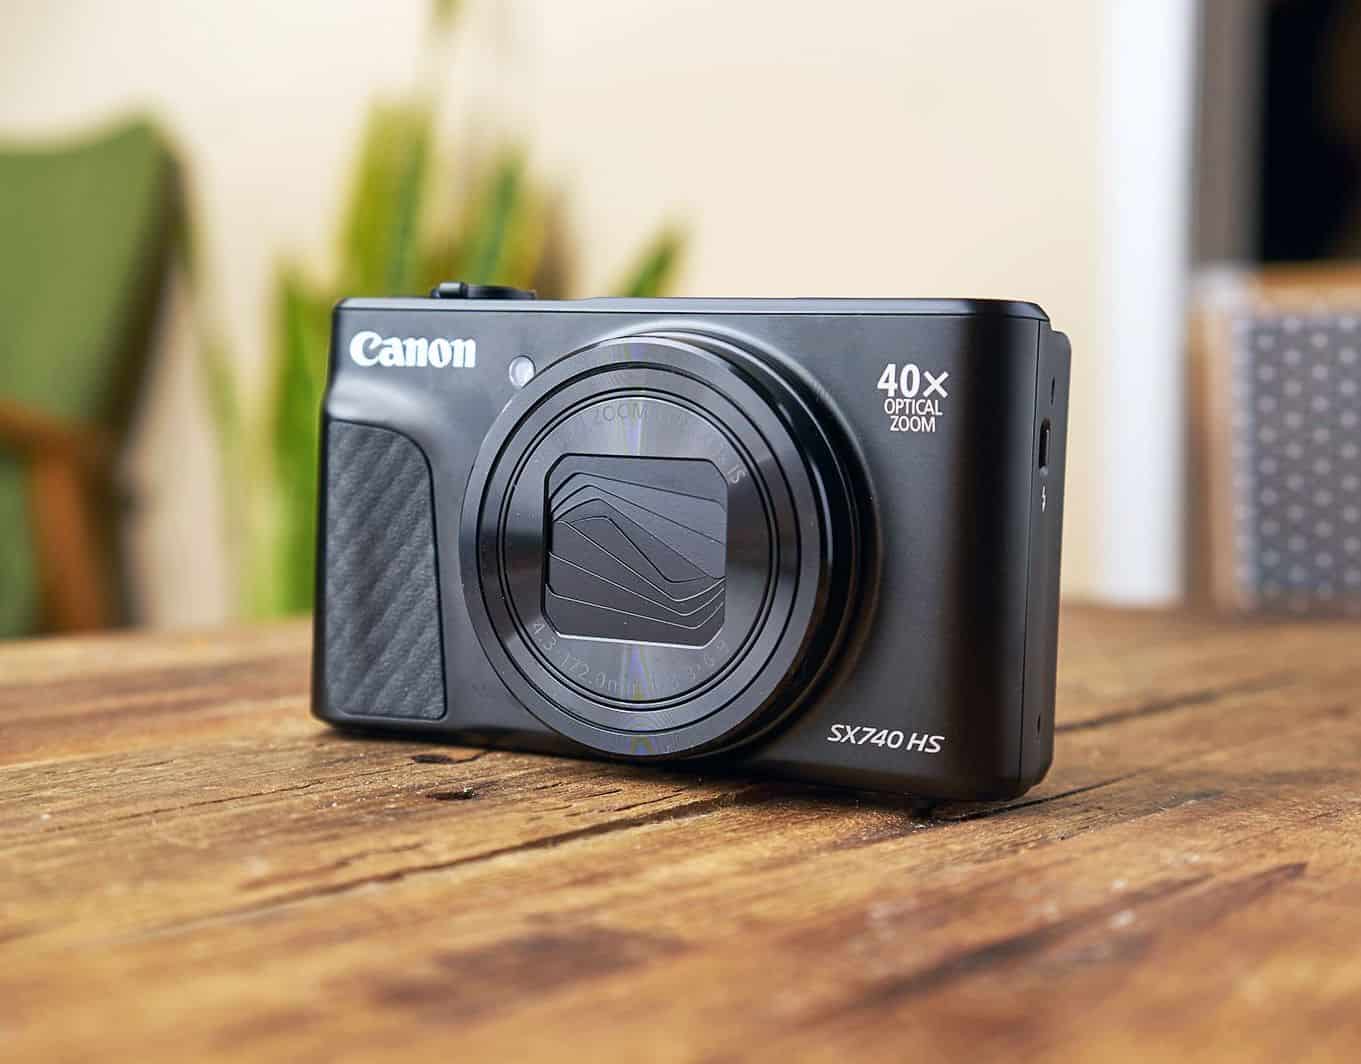 Canon PowerShot SX740 HS Review ~ A Great Buy Or Not?